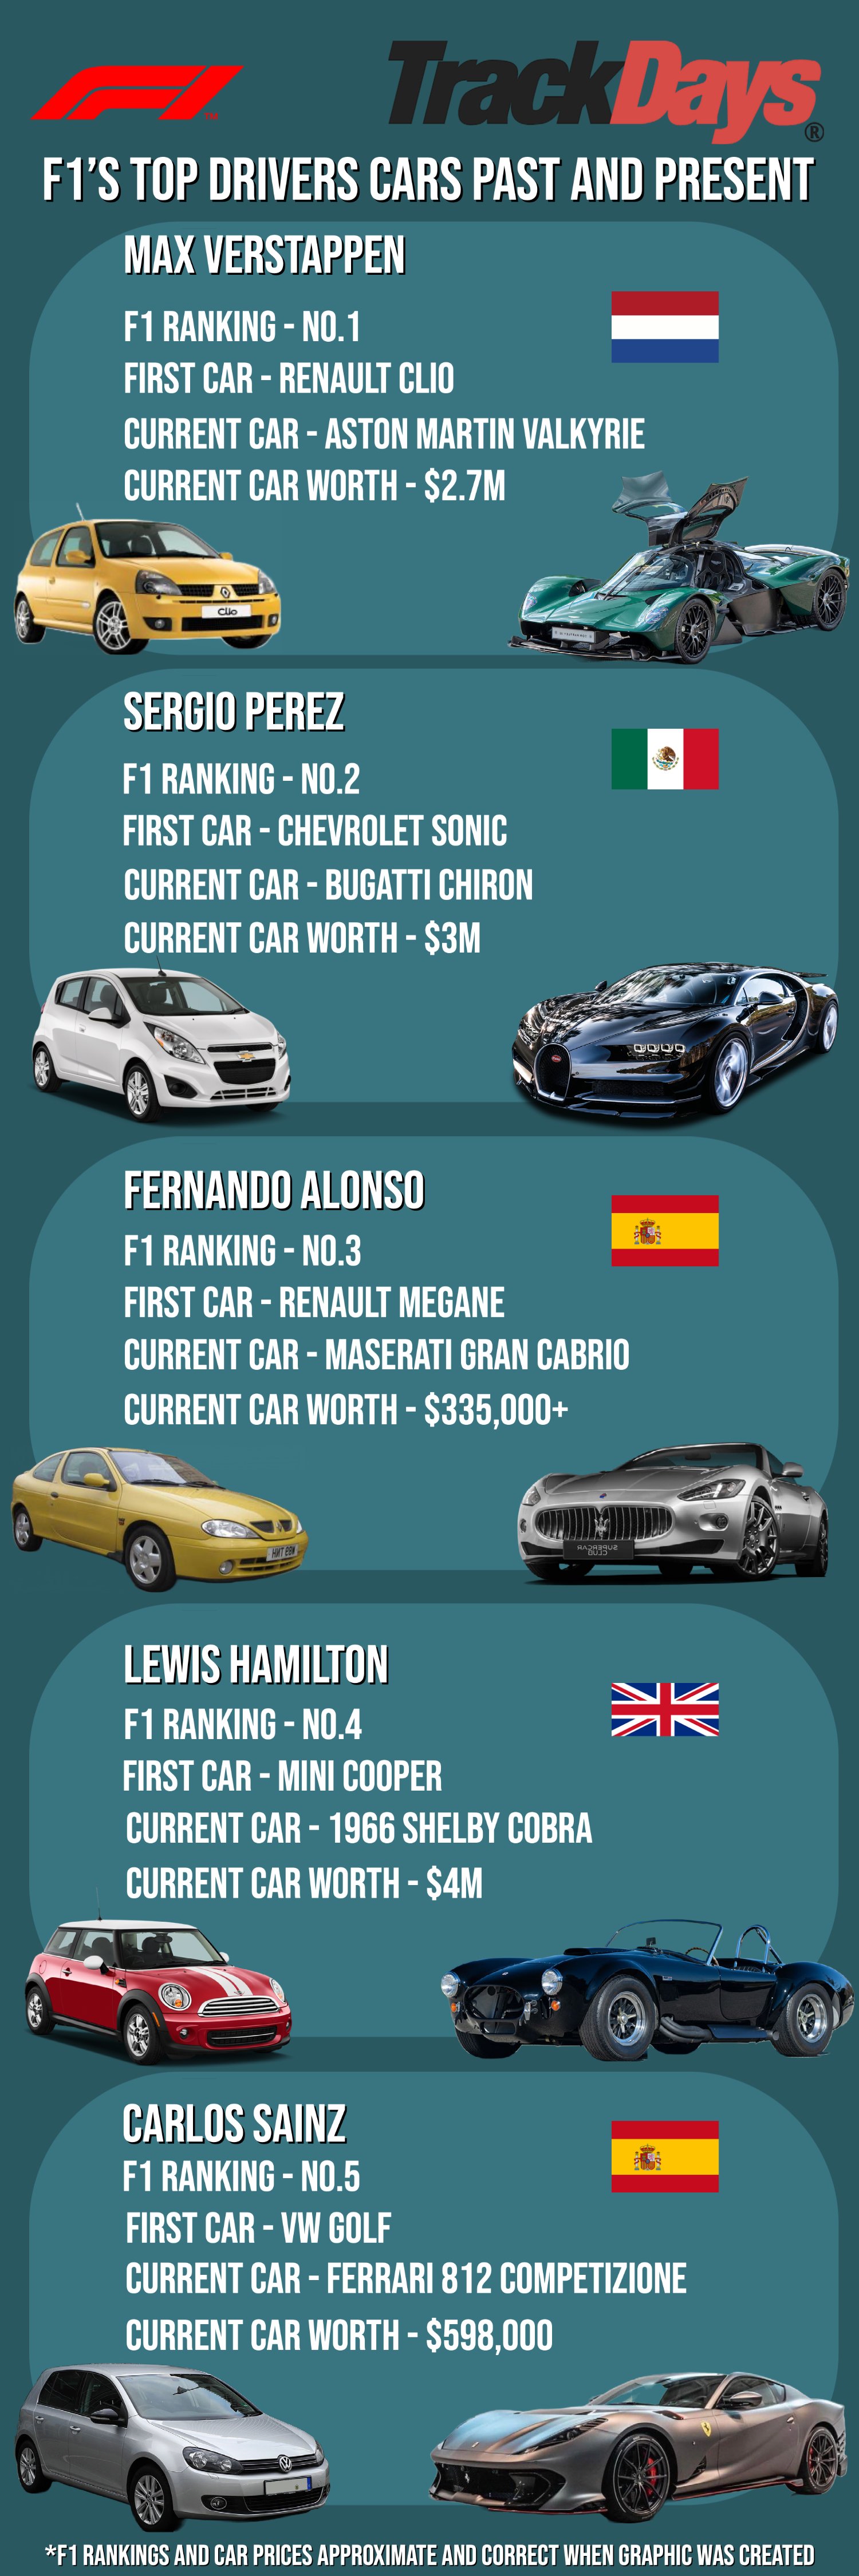 F1 Drivers Cars Past and Present